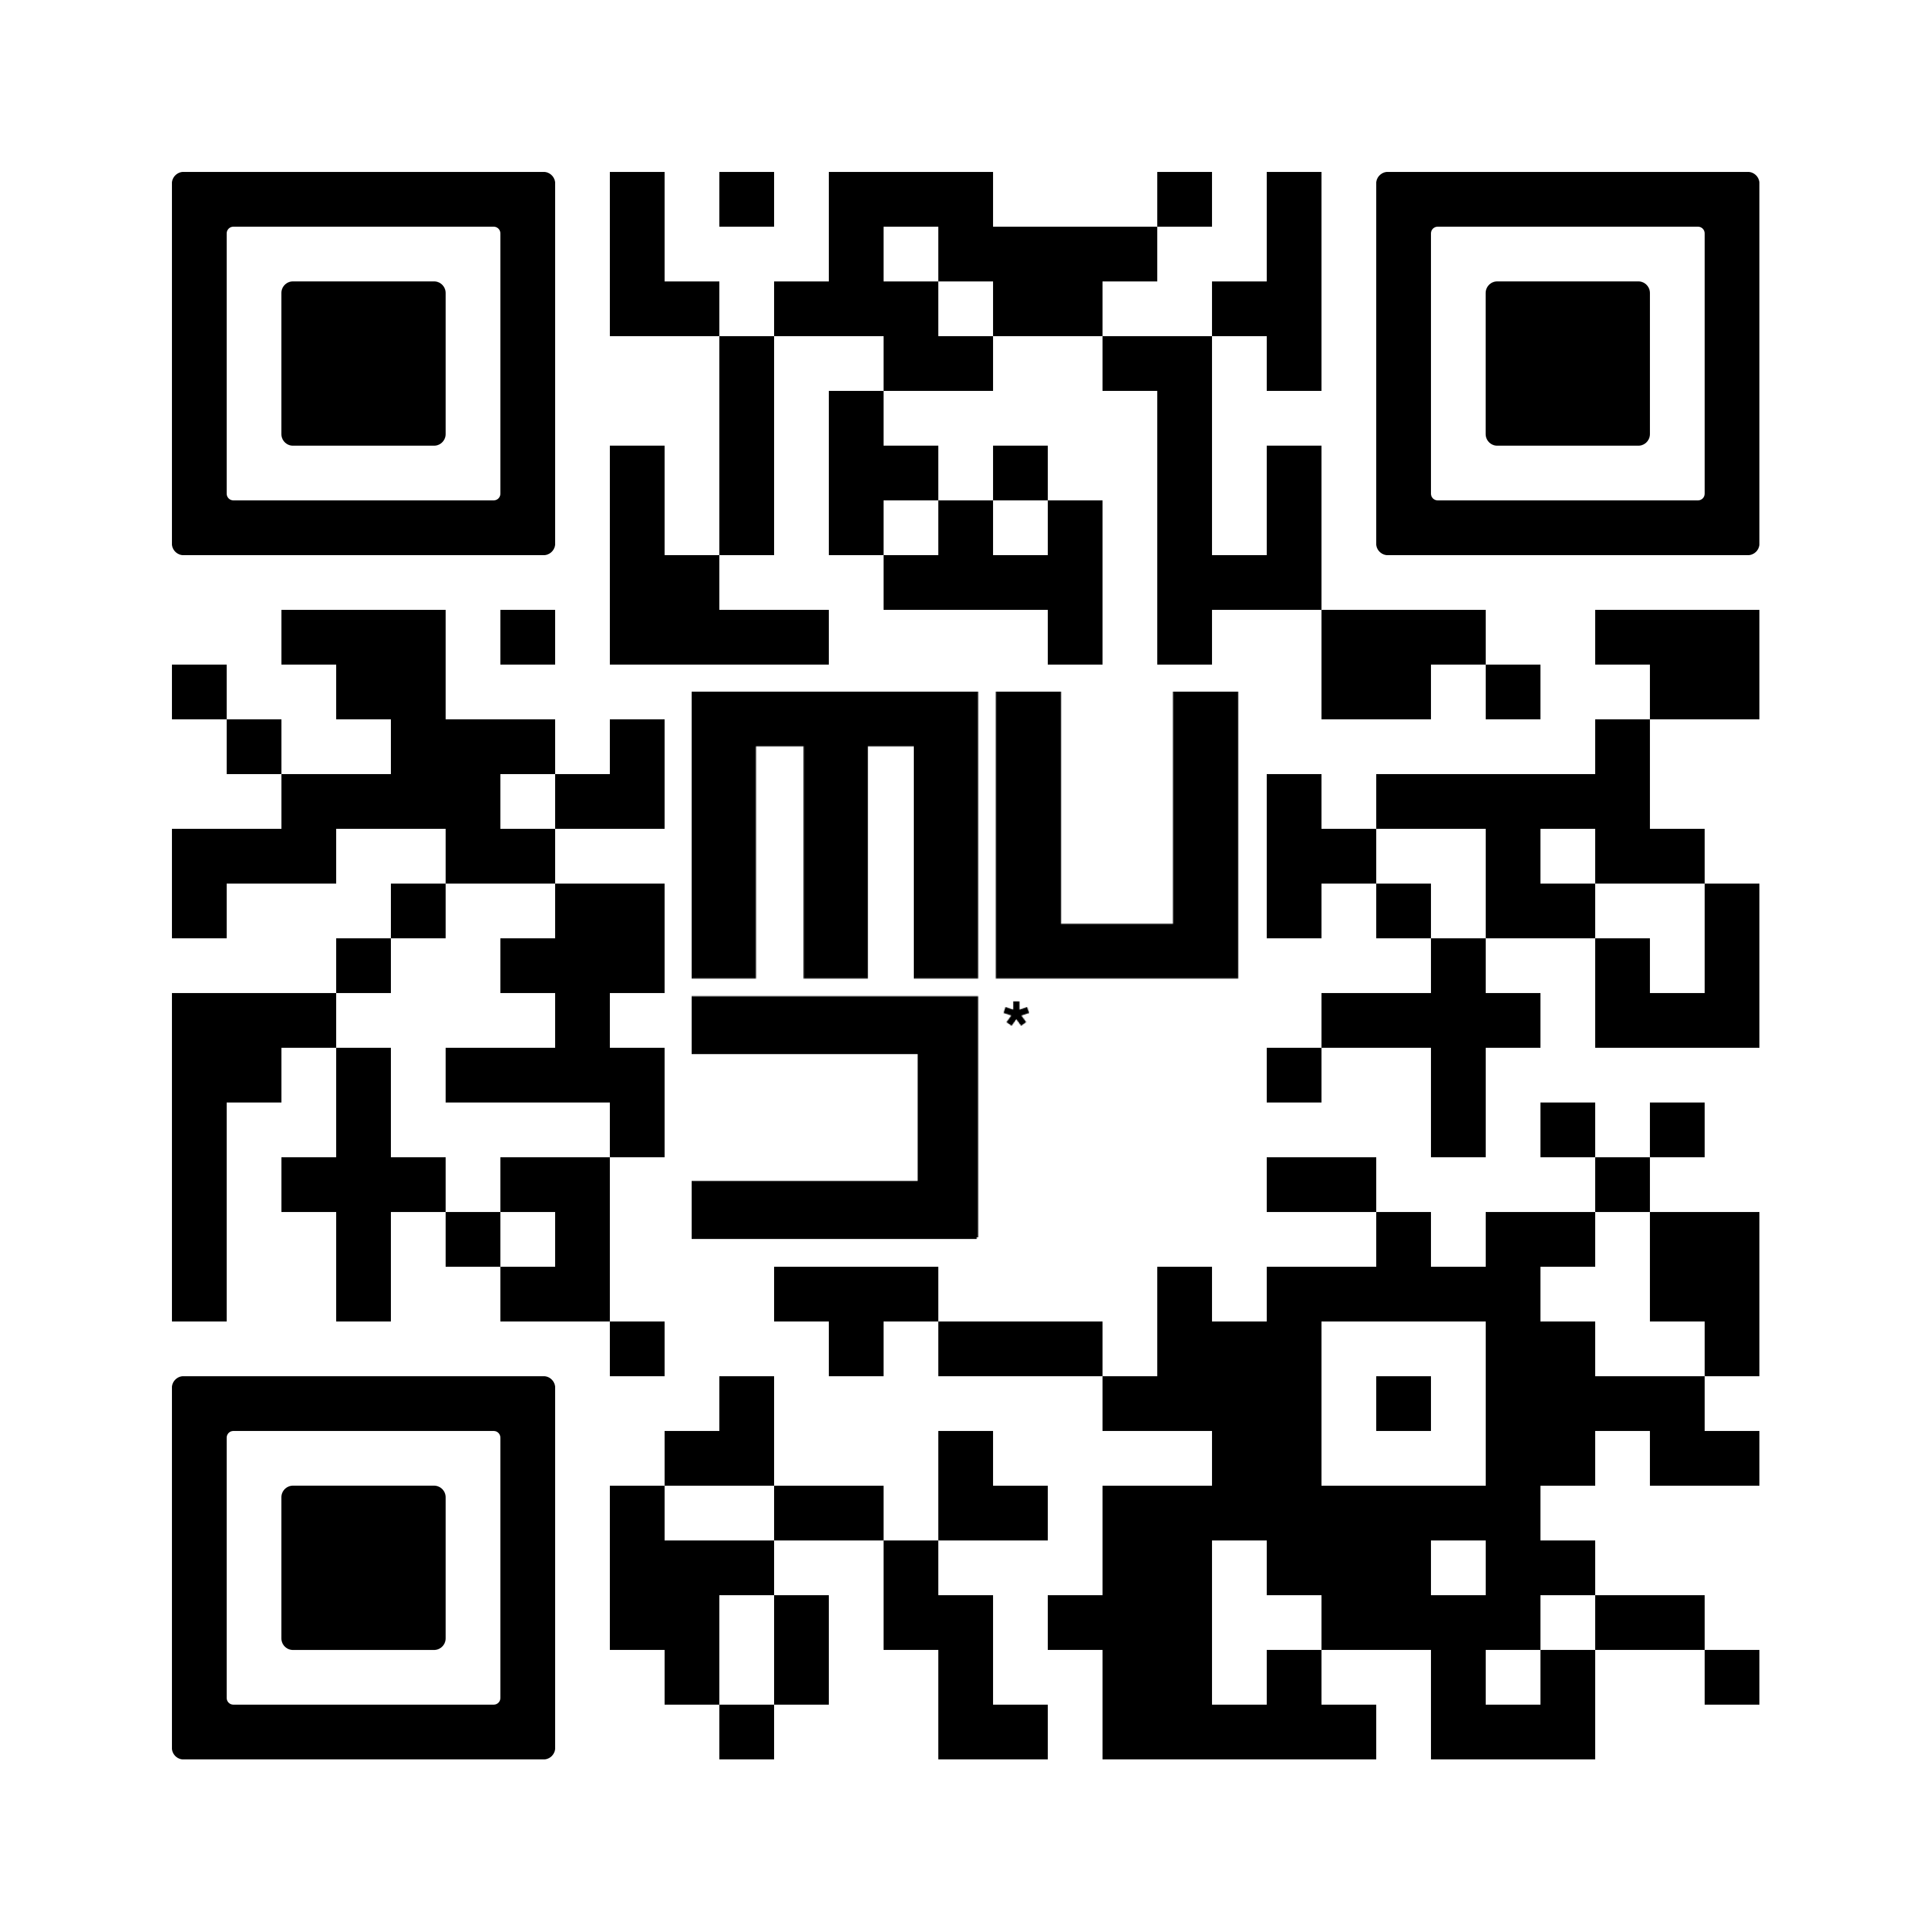 QR code to open the Trinity Metaverse Verse